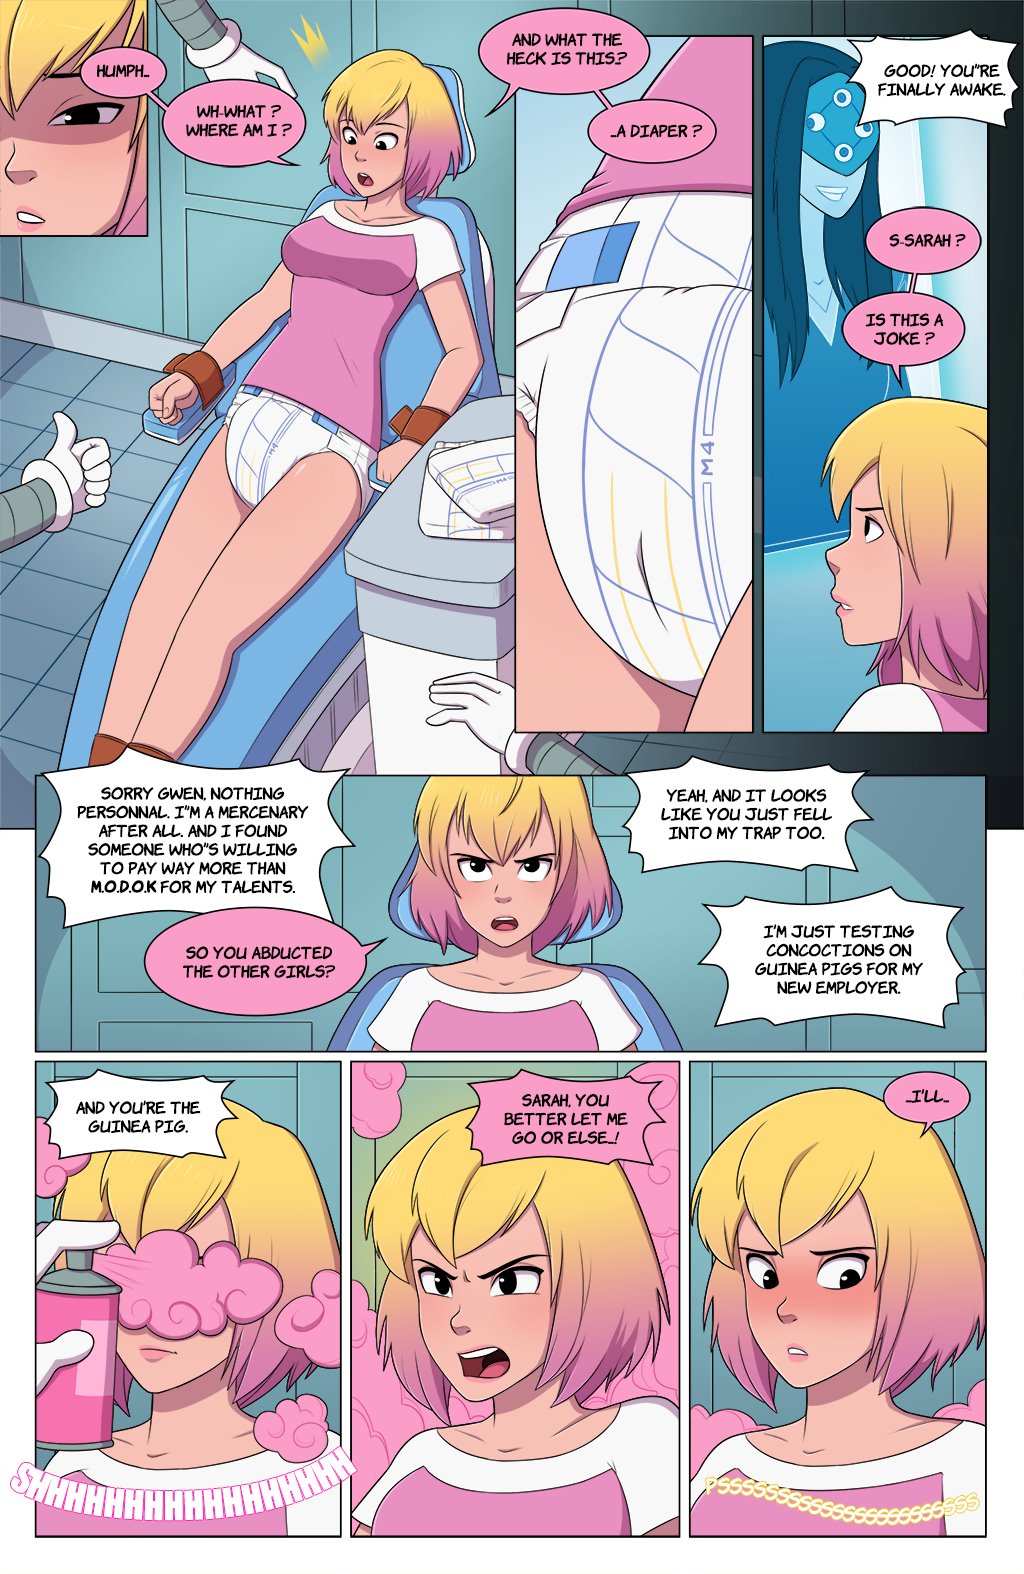 Anime Shemale Sex Diapers - Shemale Diaper Porn Comics | Anal Dream House